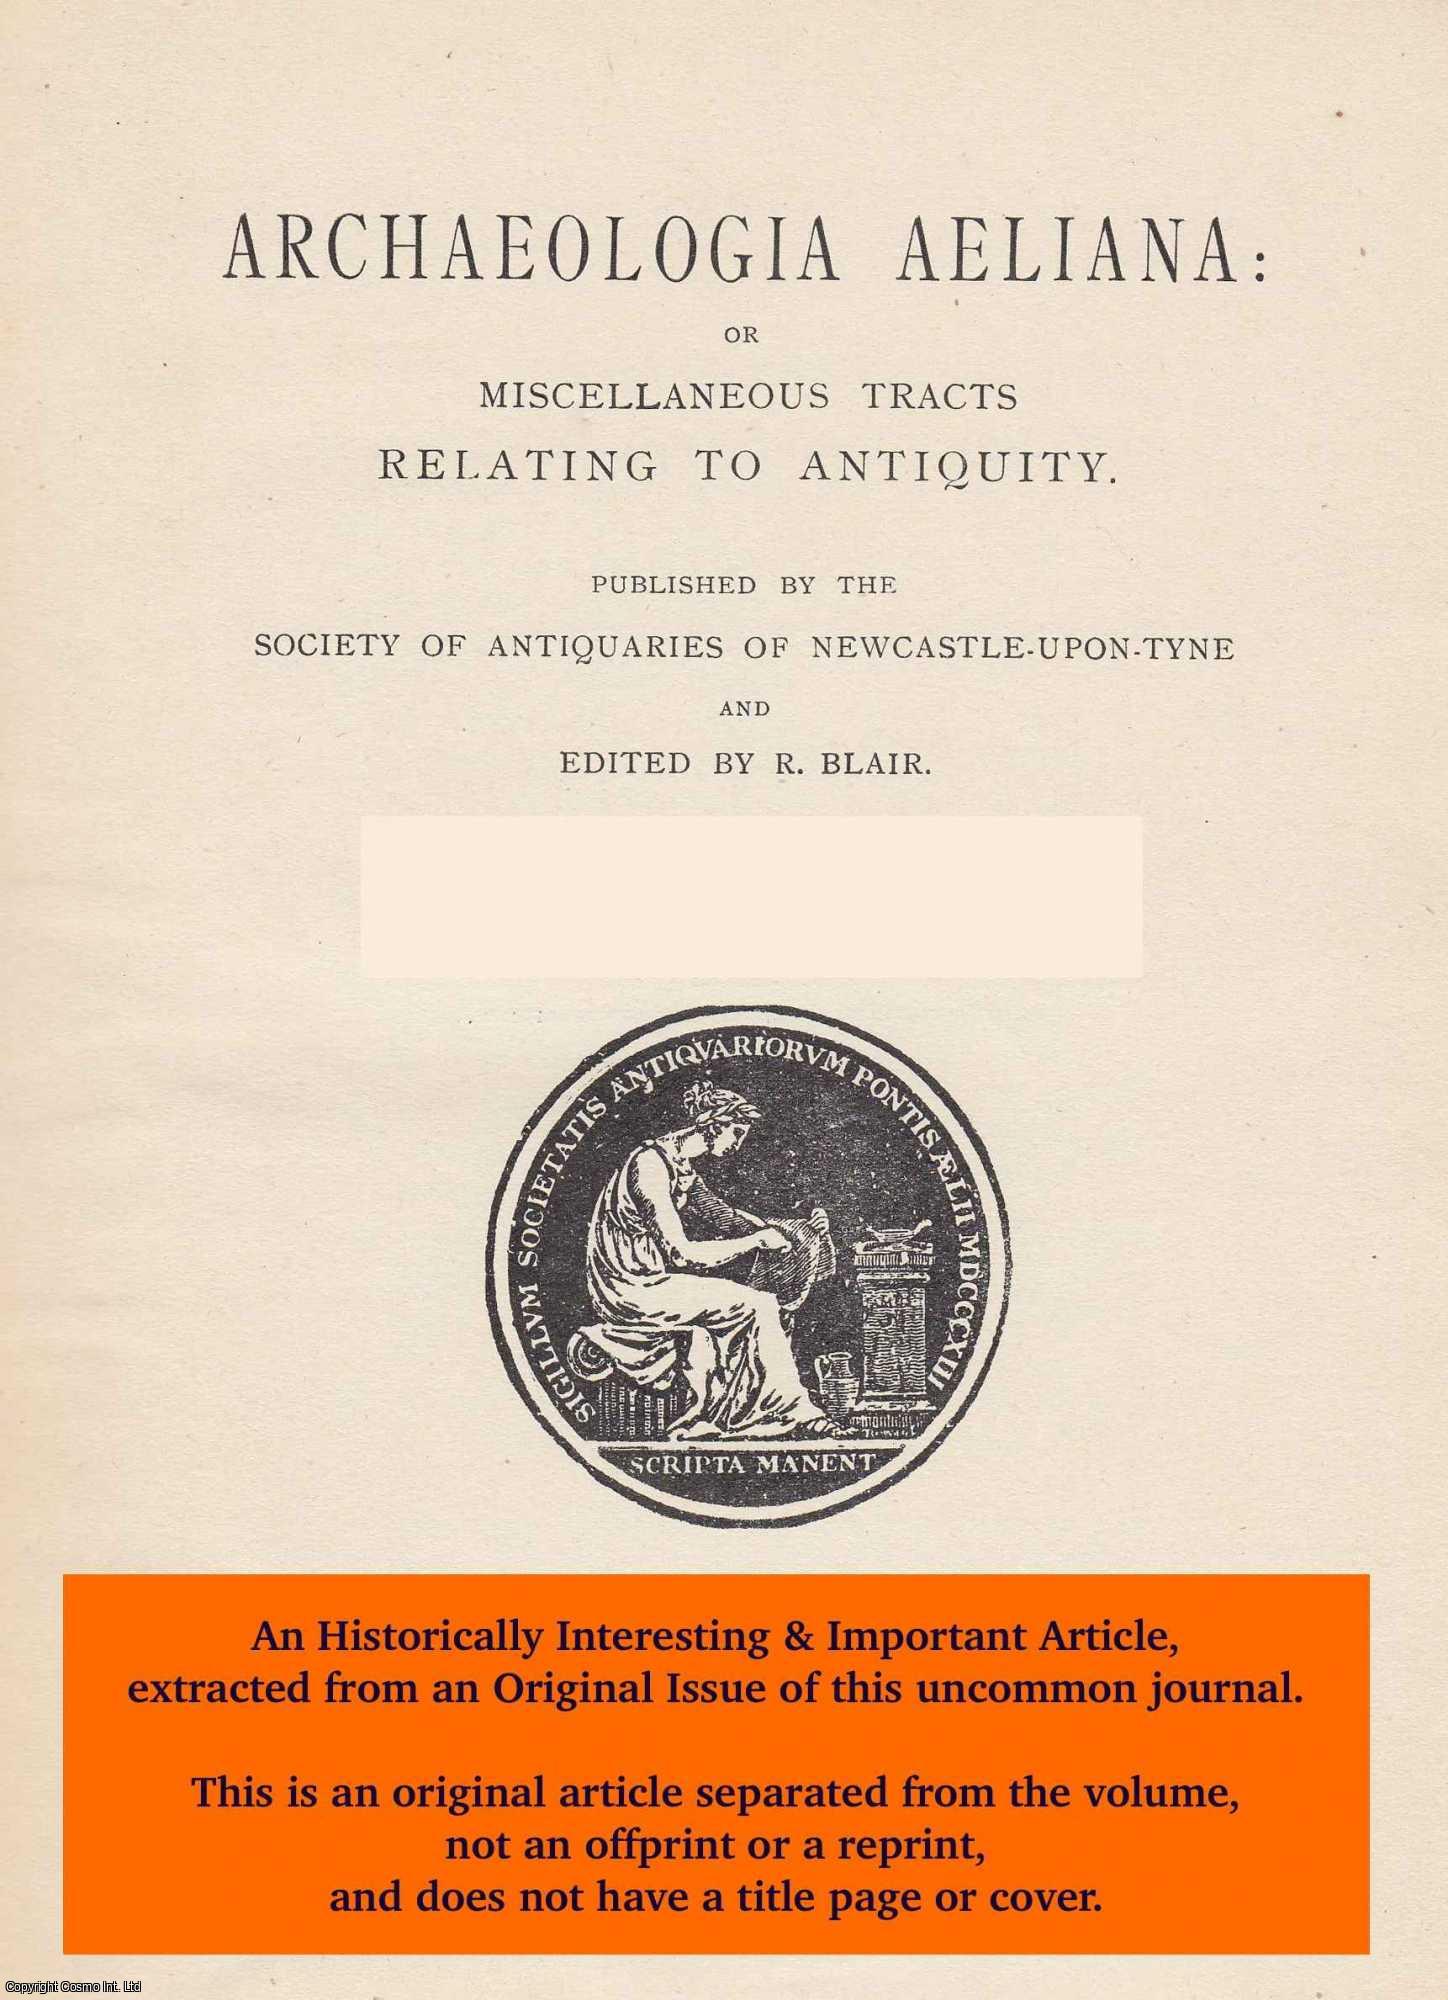 J. D. Cowen - The Allan Crosier. An original article from The Archaeologia Aeliana: or Miscellaneous Tracts Relating to Antiquity, 1932.